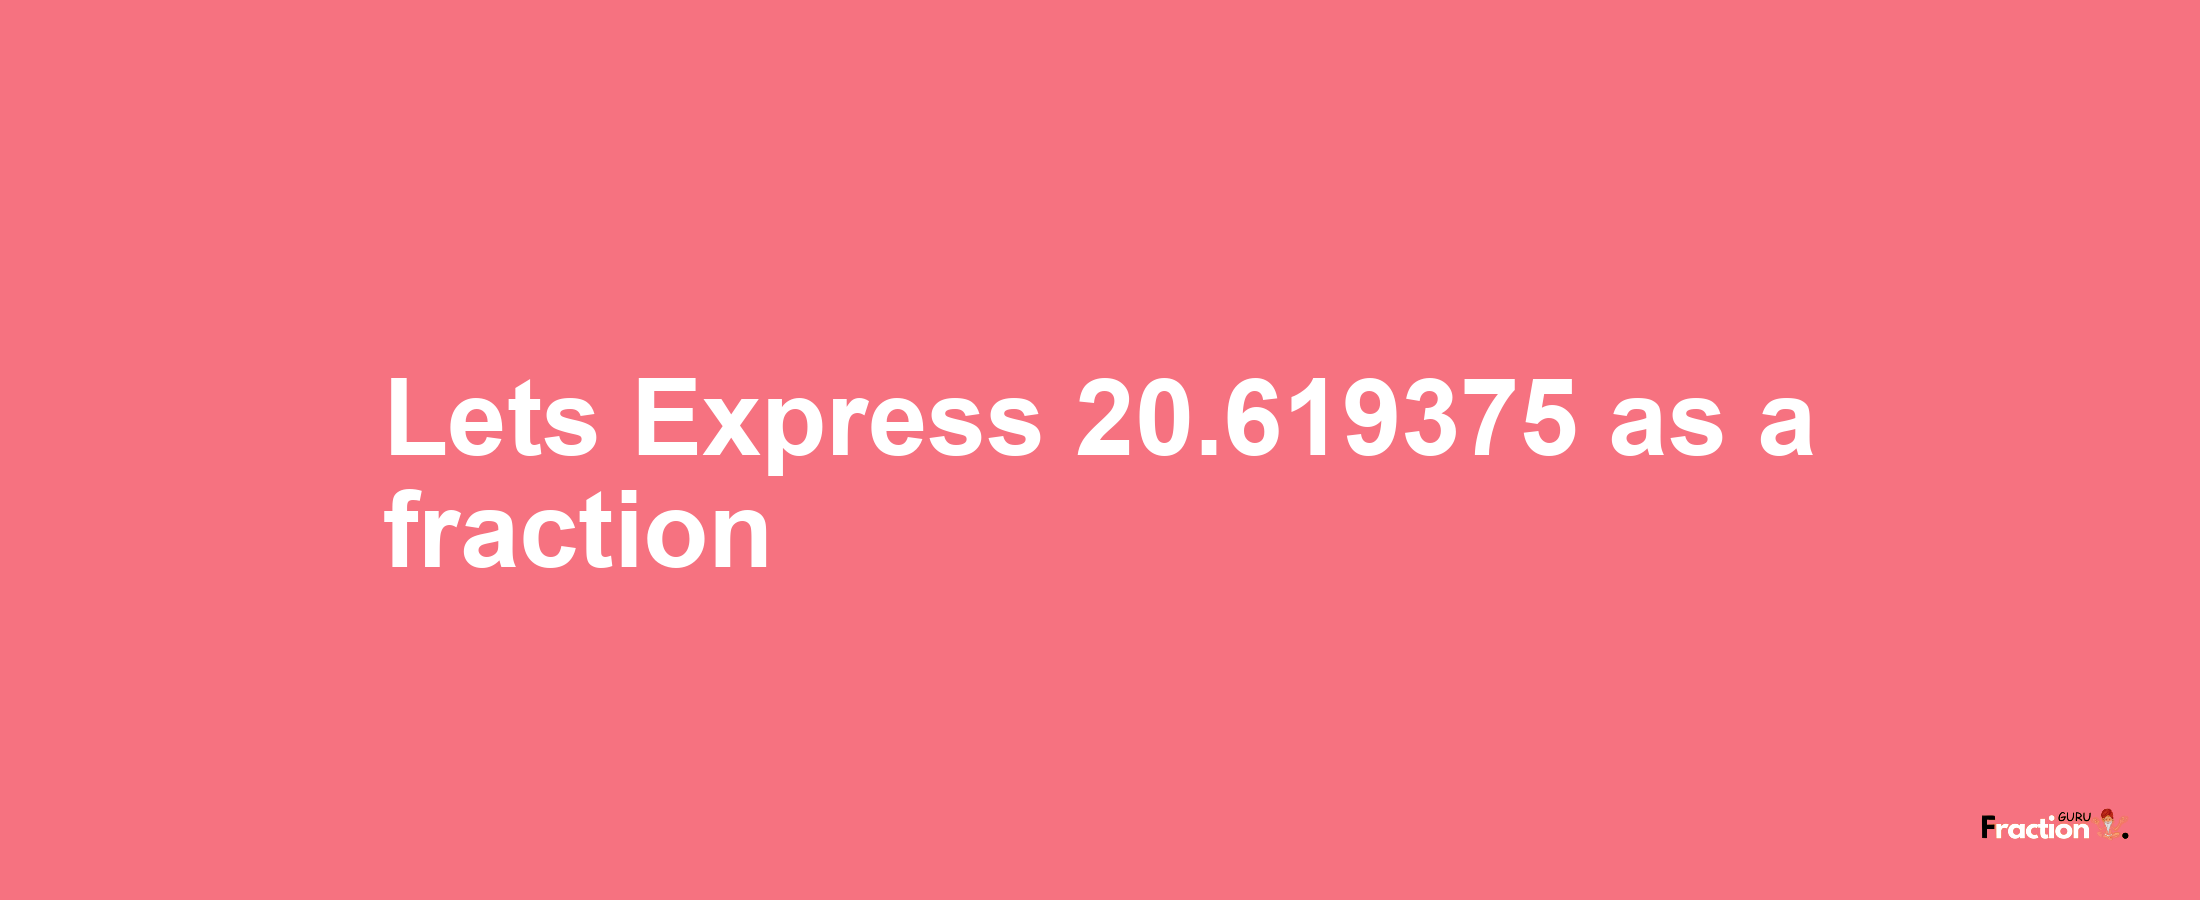 Lets Express 20.619375 as afraction